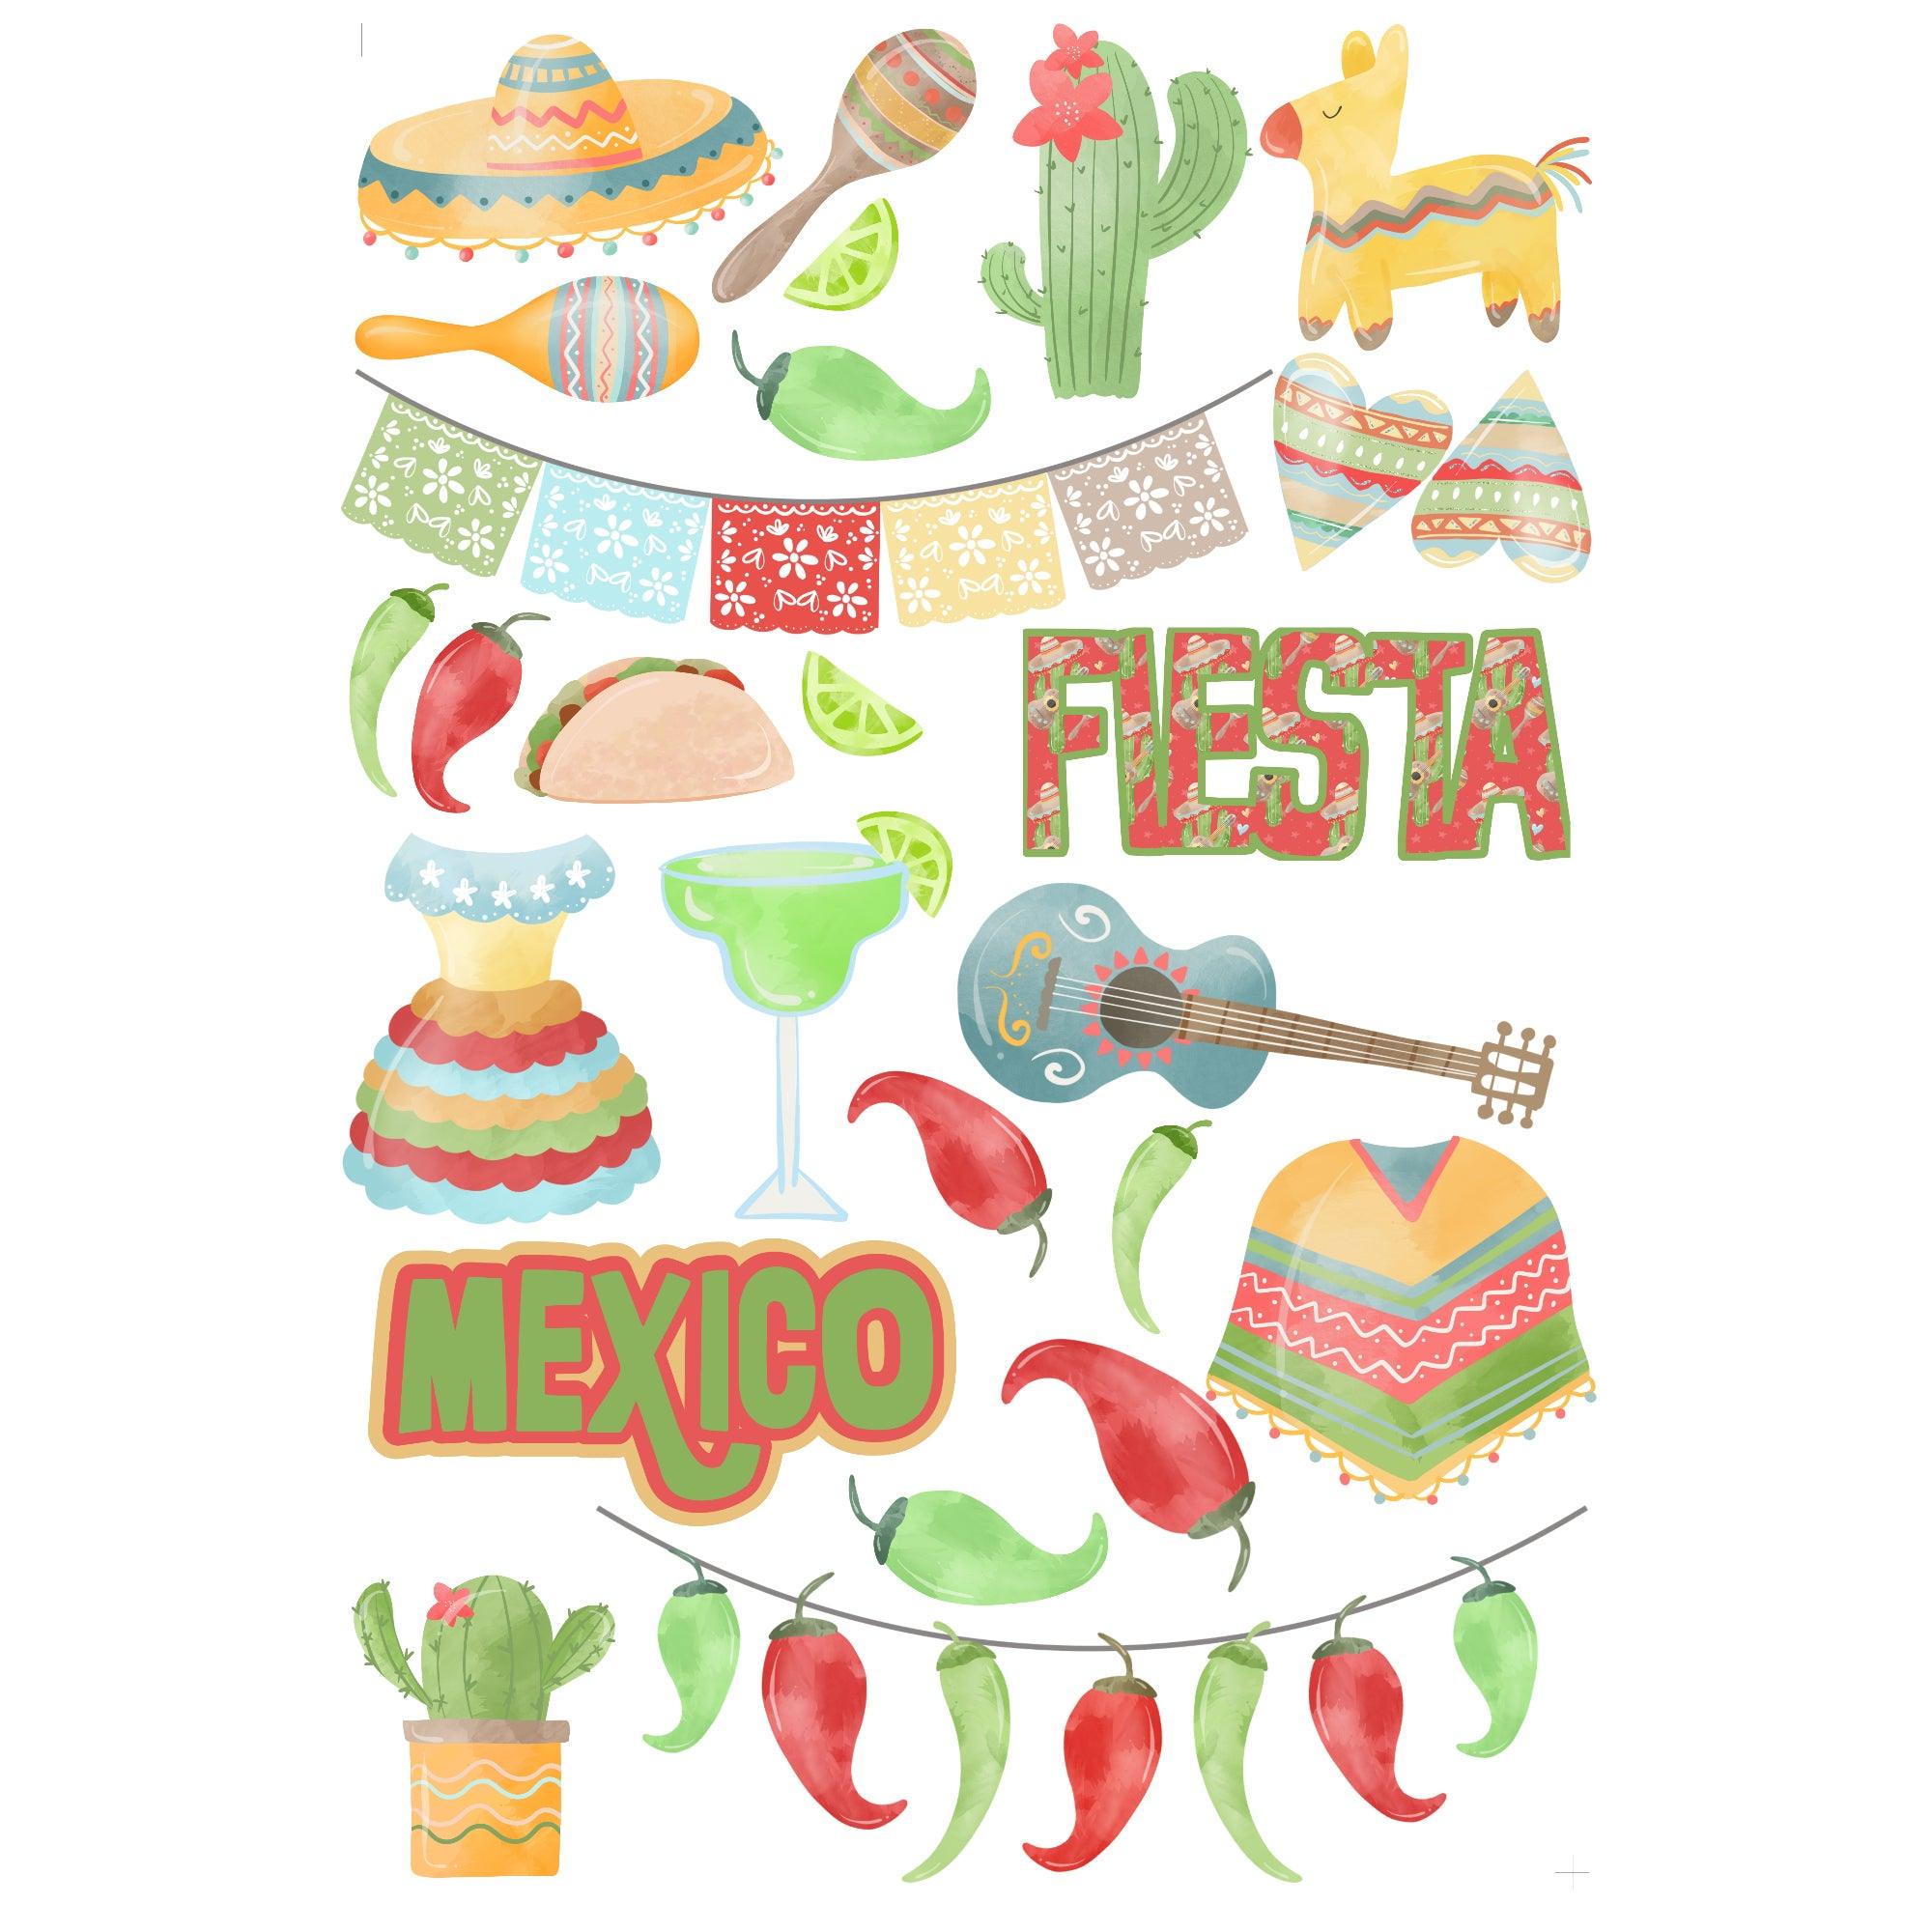 Fiesta Collection 12 x 12 Scrapbook Paper Pack & Embellishment Kit by SSC Designs - Scrapbook Supply Companies